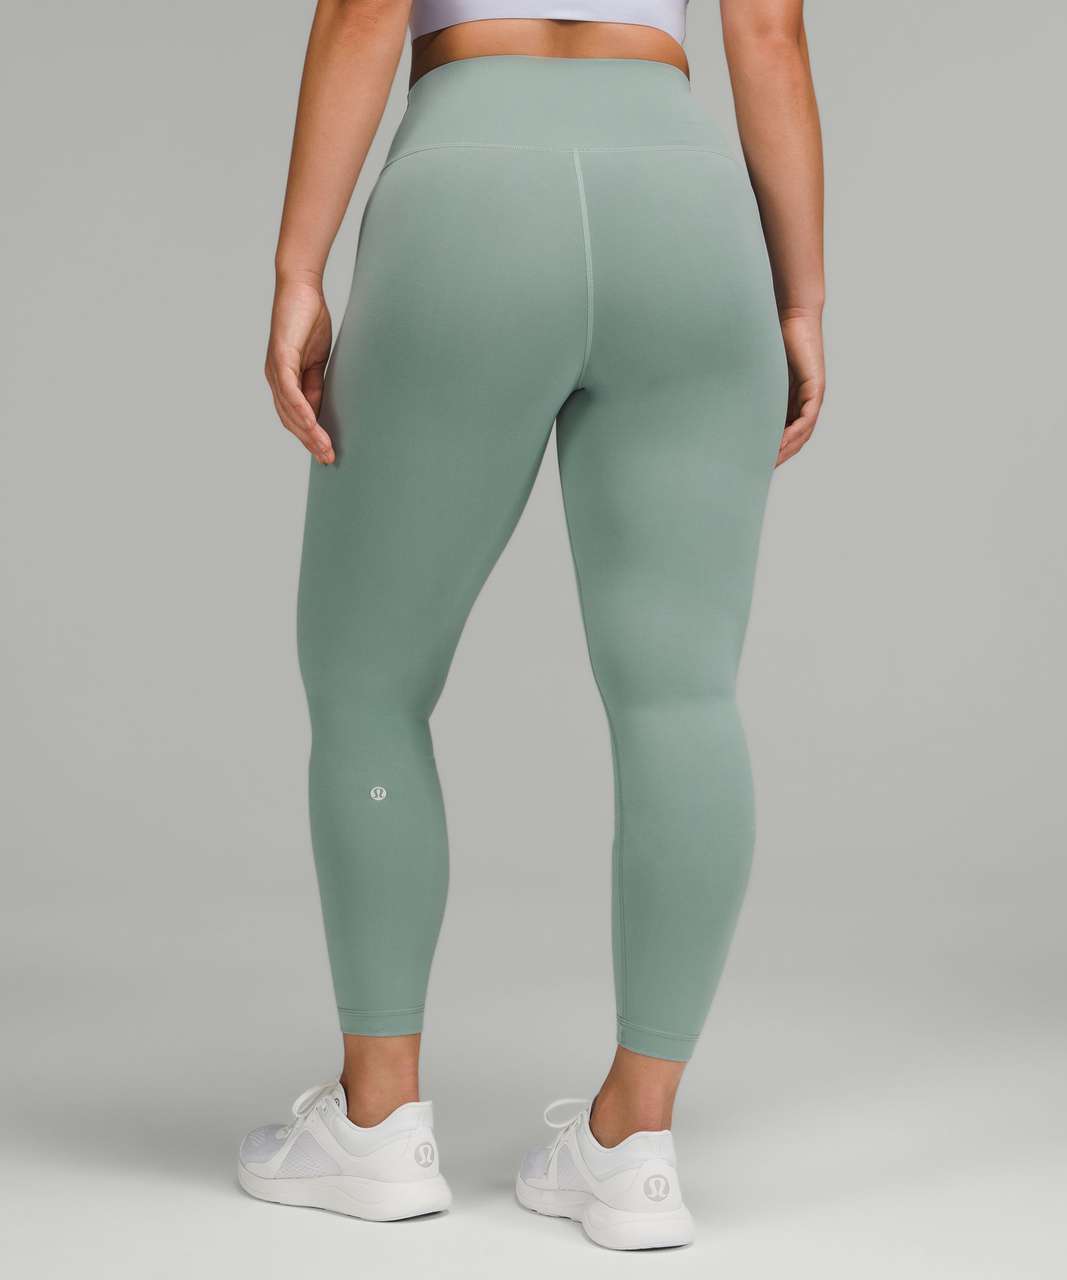 Lululemon Wunder Train Contour Fit High-Rise Tight 25 - Smoked